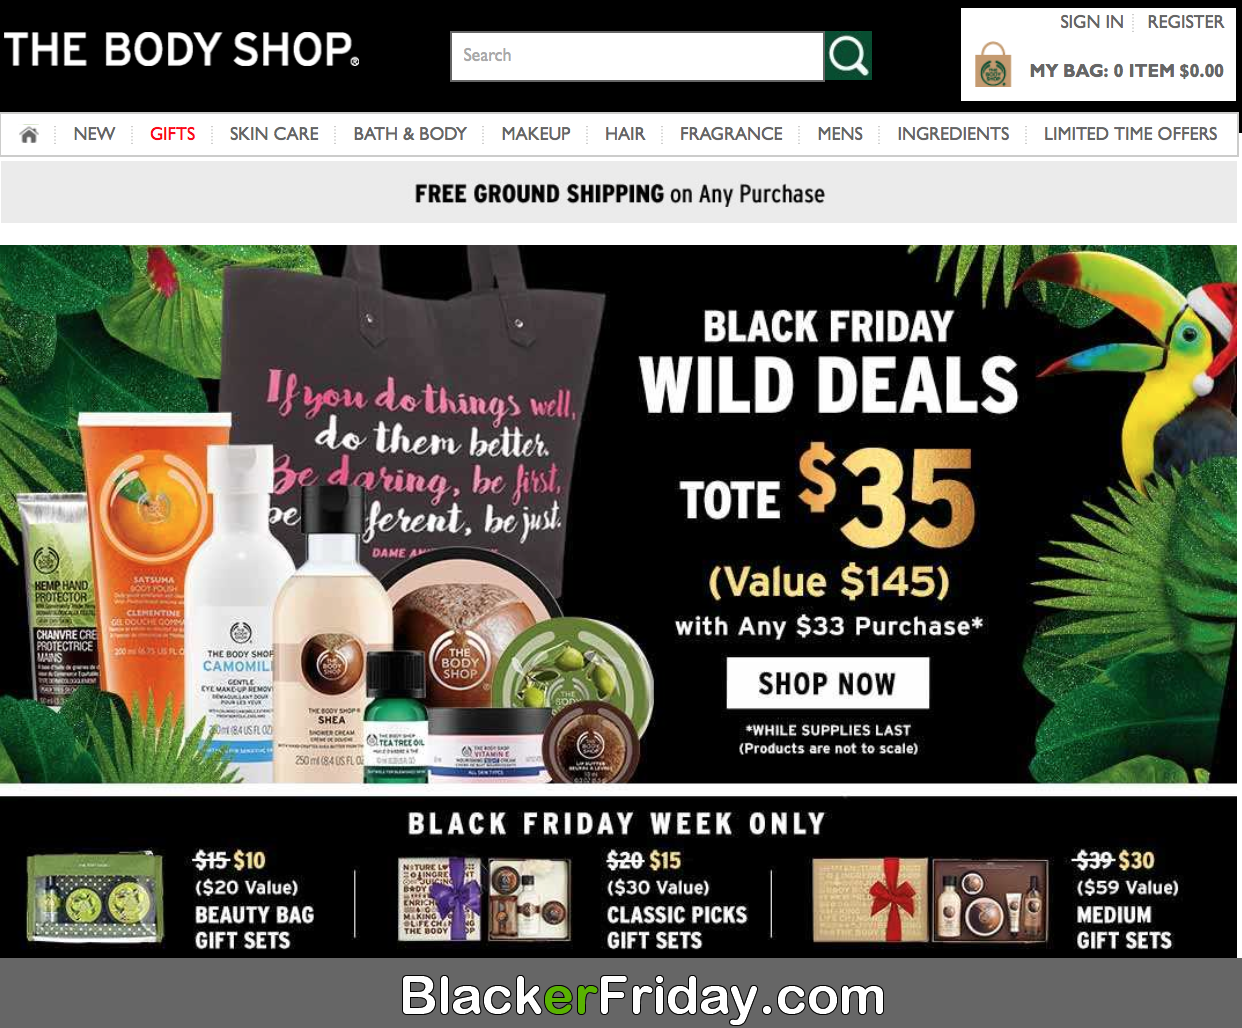 The Body Shop Black Friday 2019 Ad, Sale & Tote Bag Deal - Blacker Friday